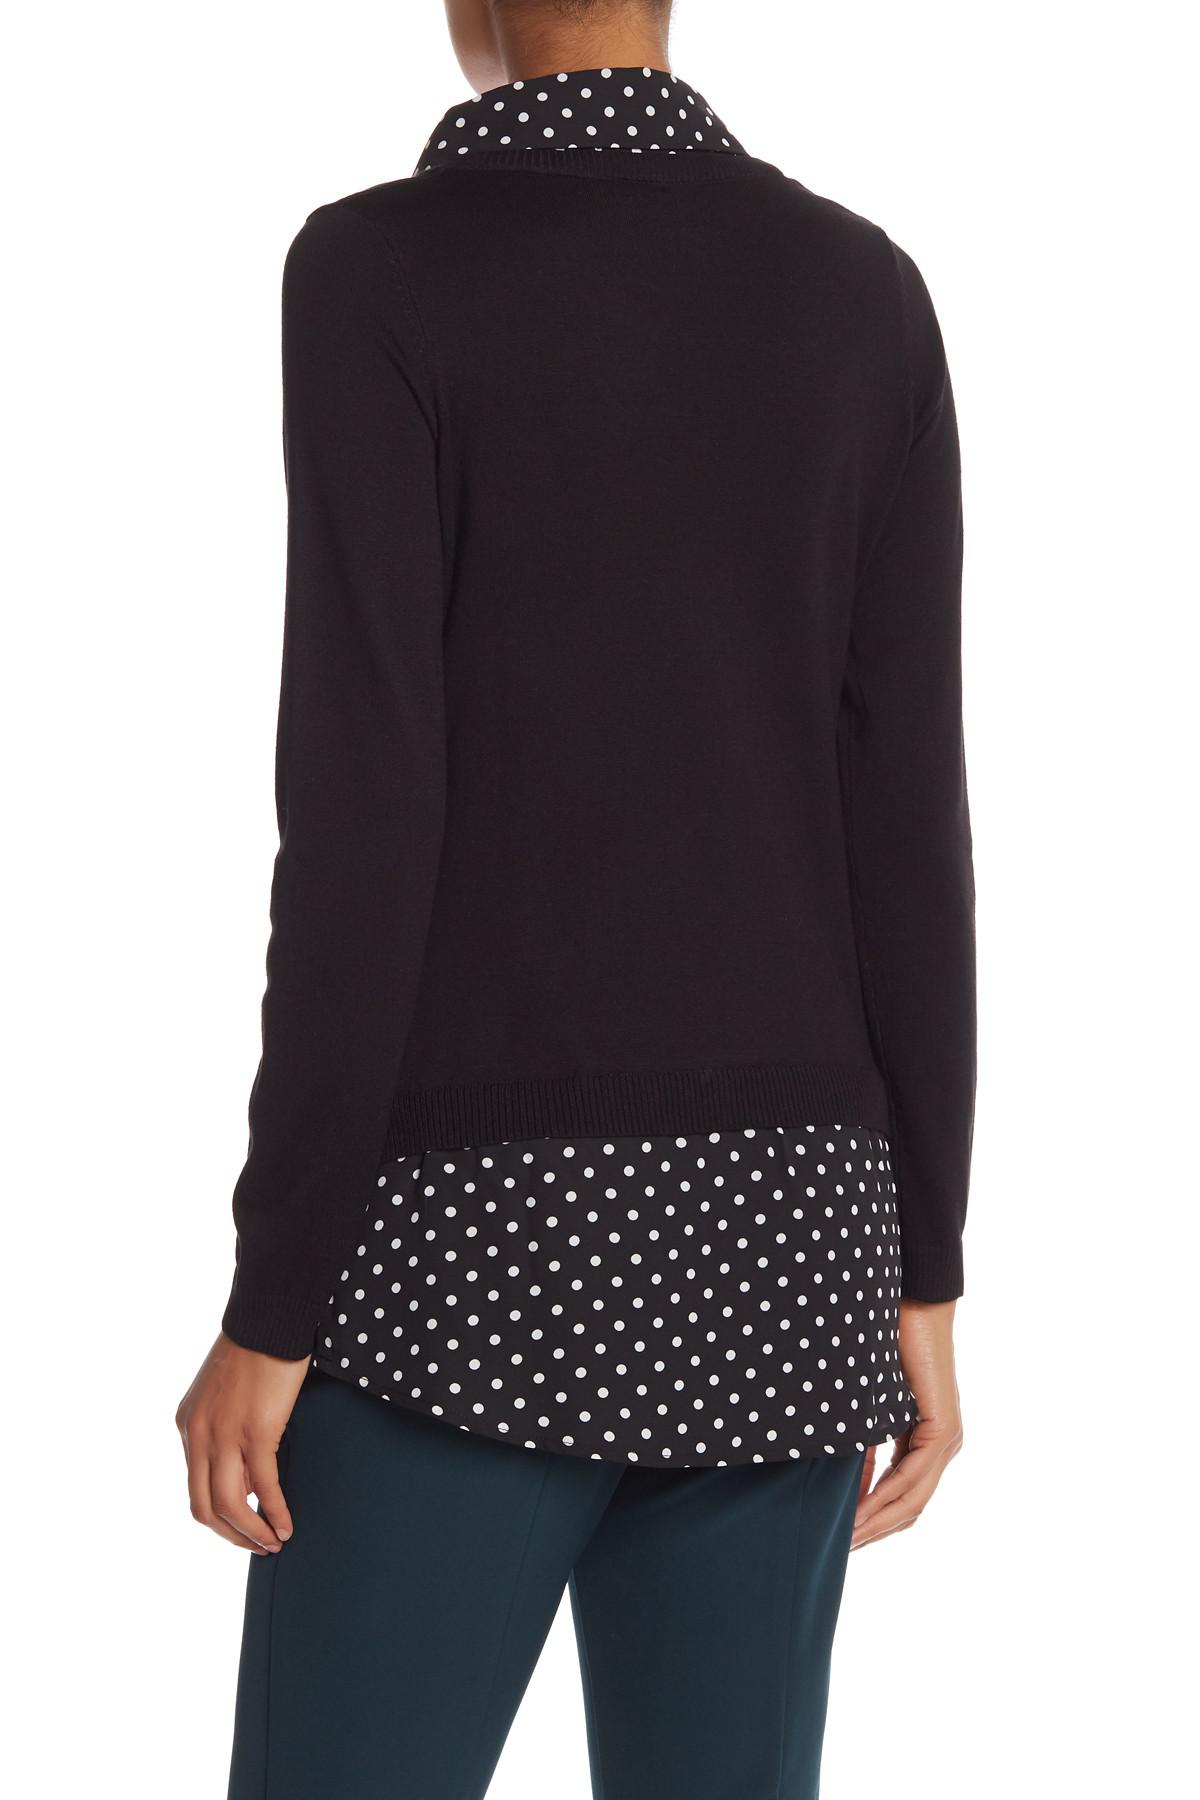 Adrianna Papell Synthetic Shirttail Twofer Sweater in Black - Lyst